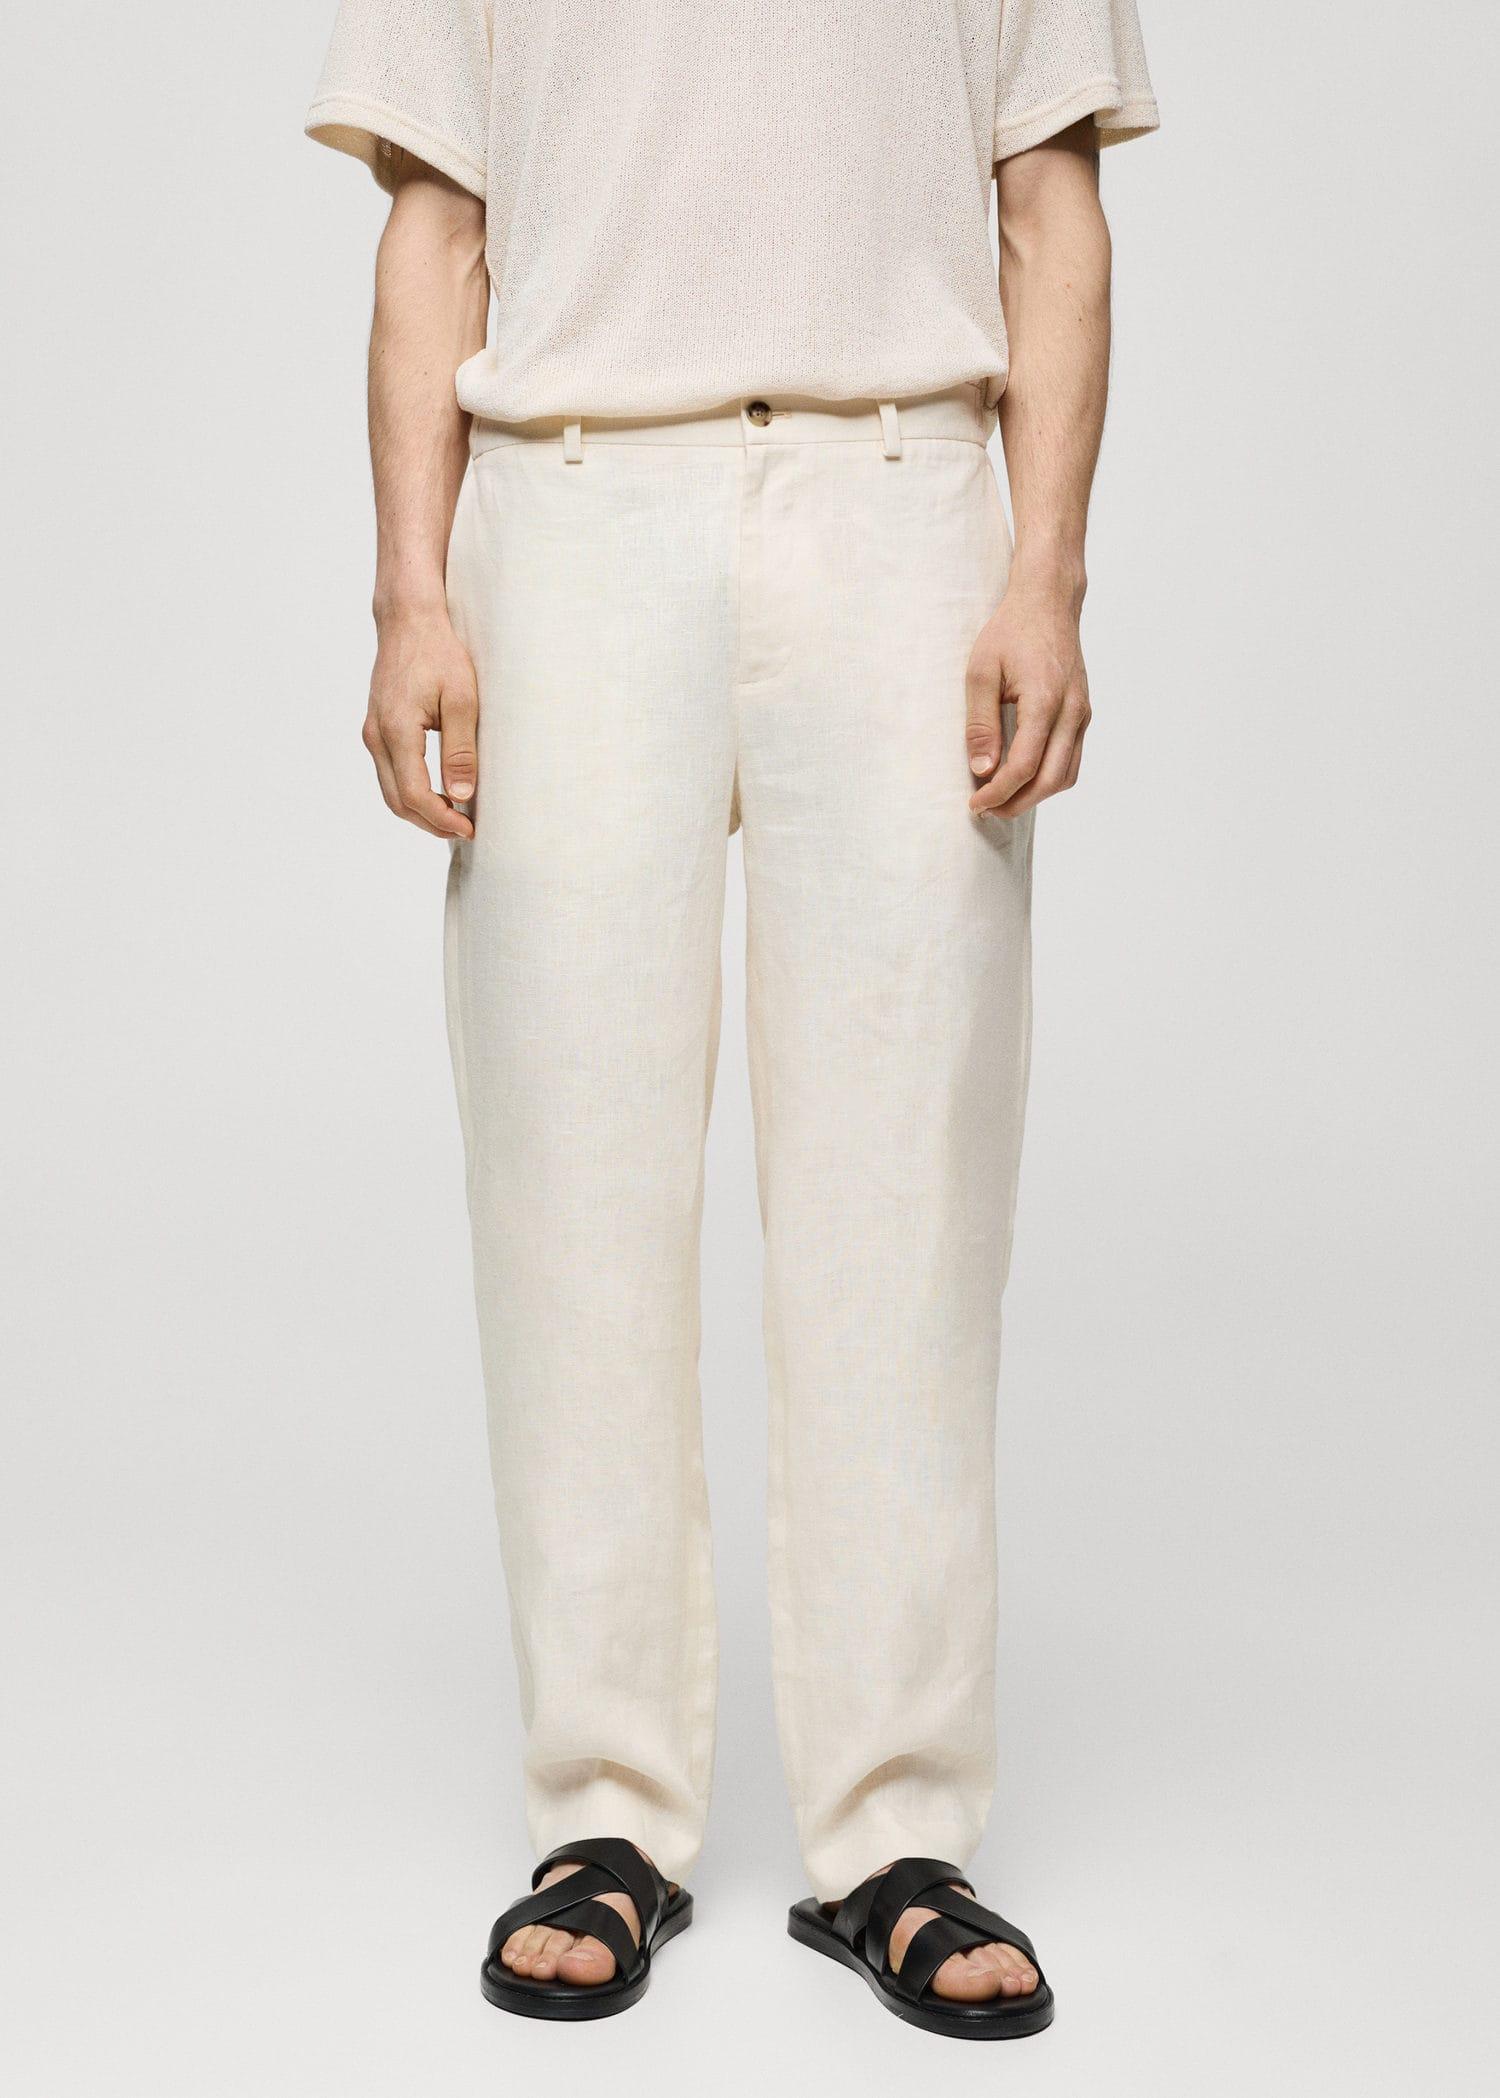 relaxed fit 100% linen pants